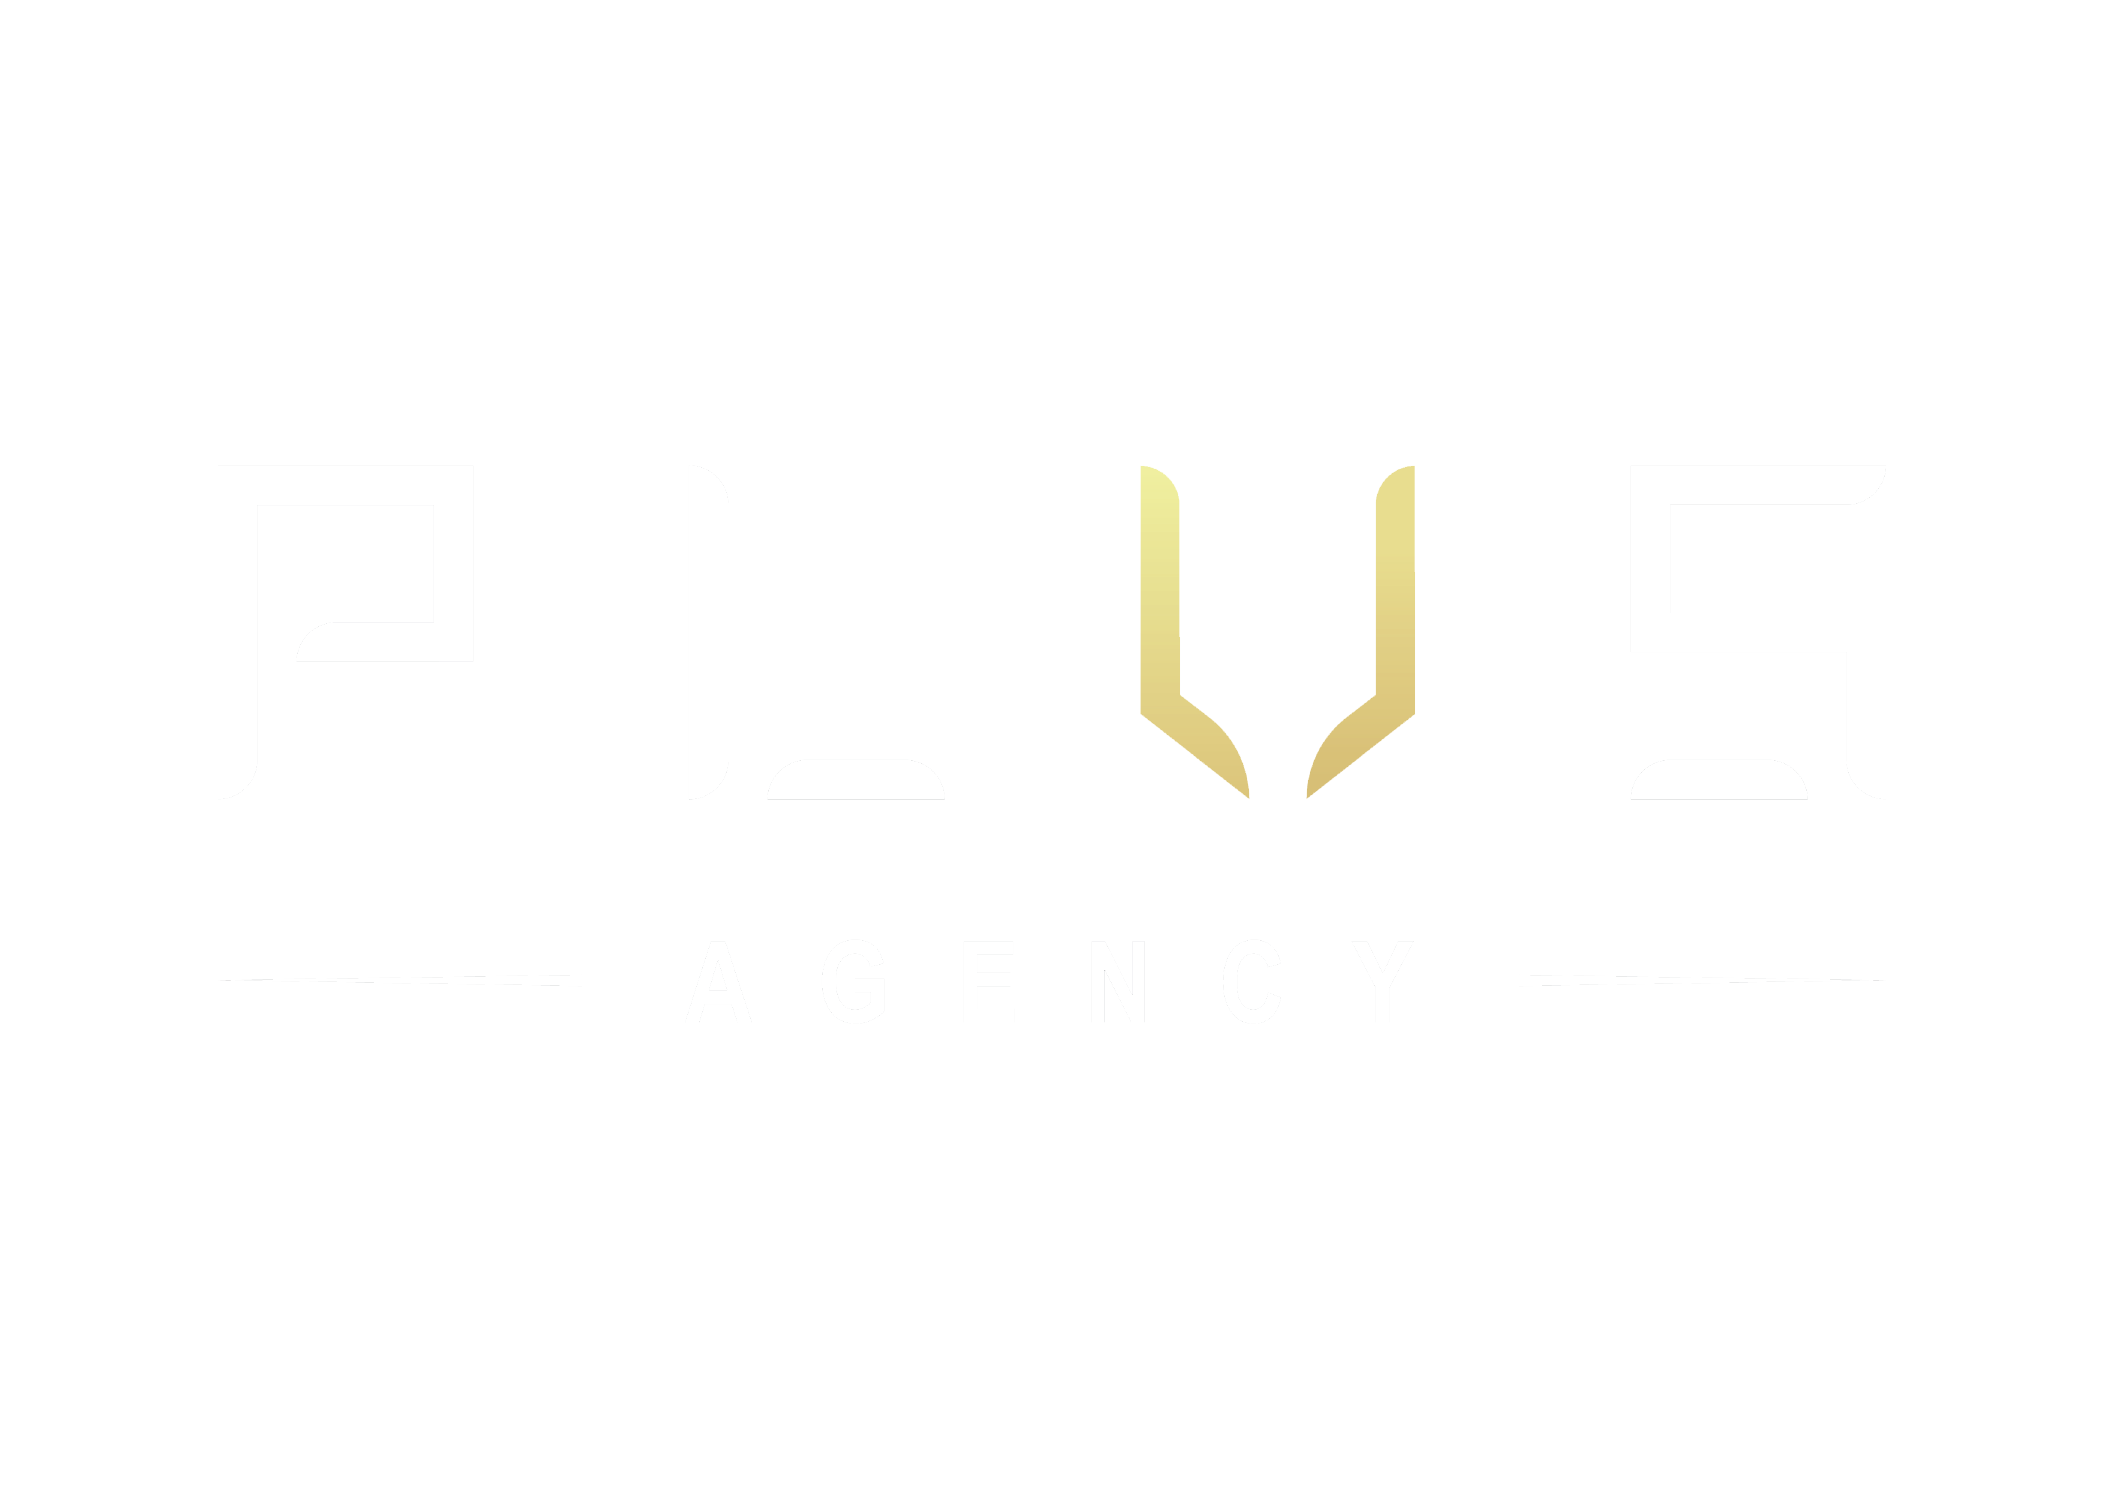 Pluse Agency